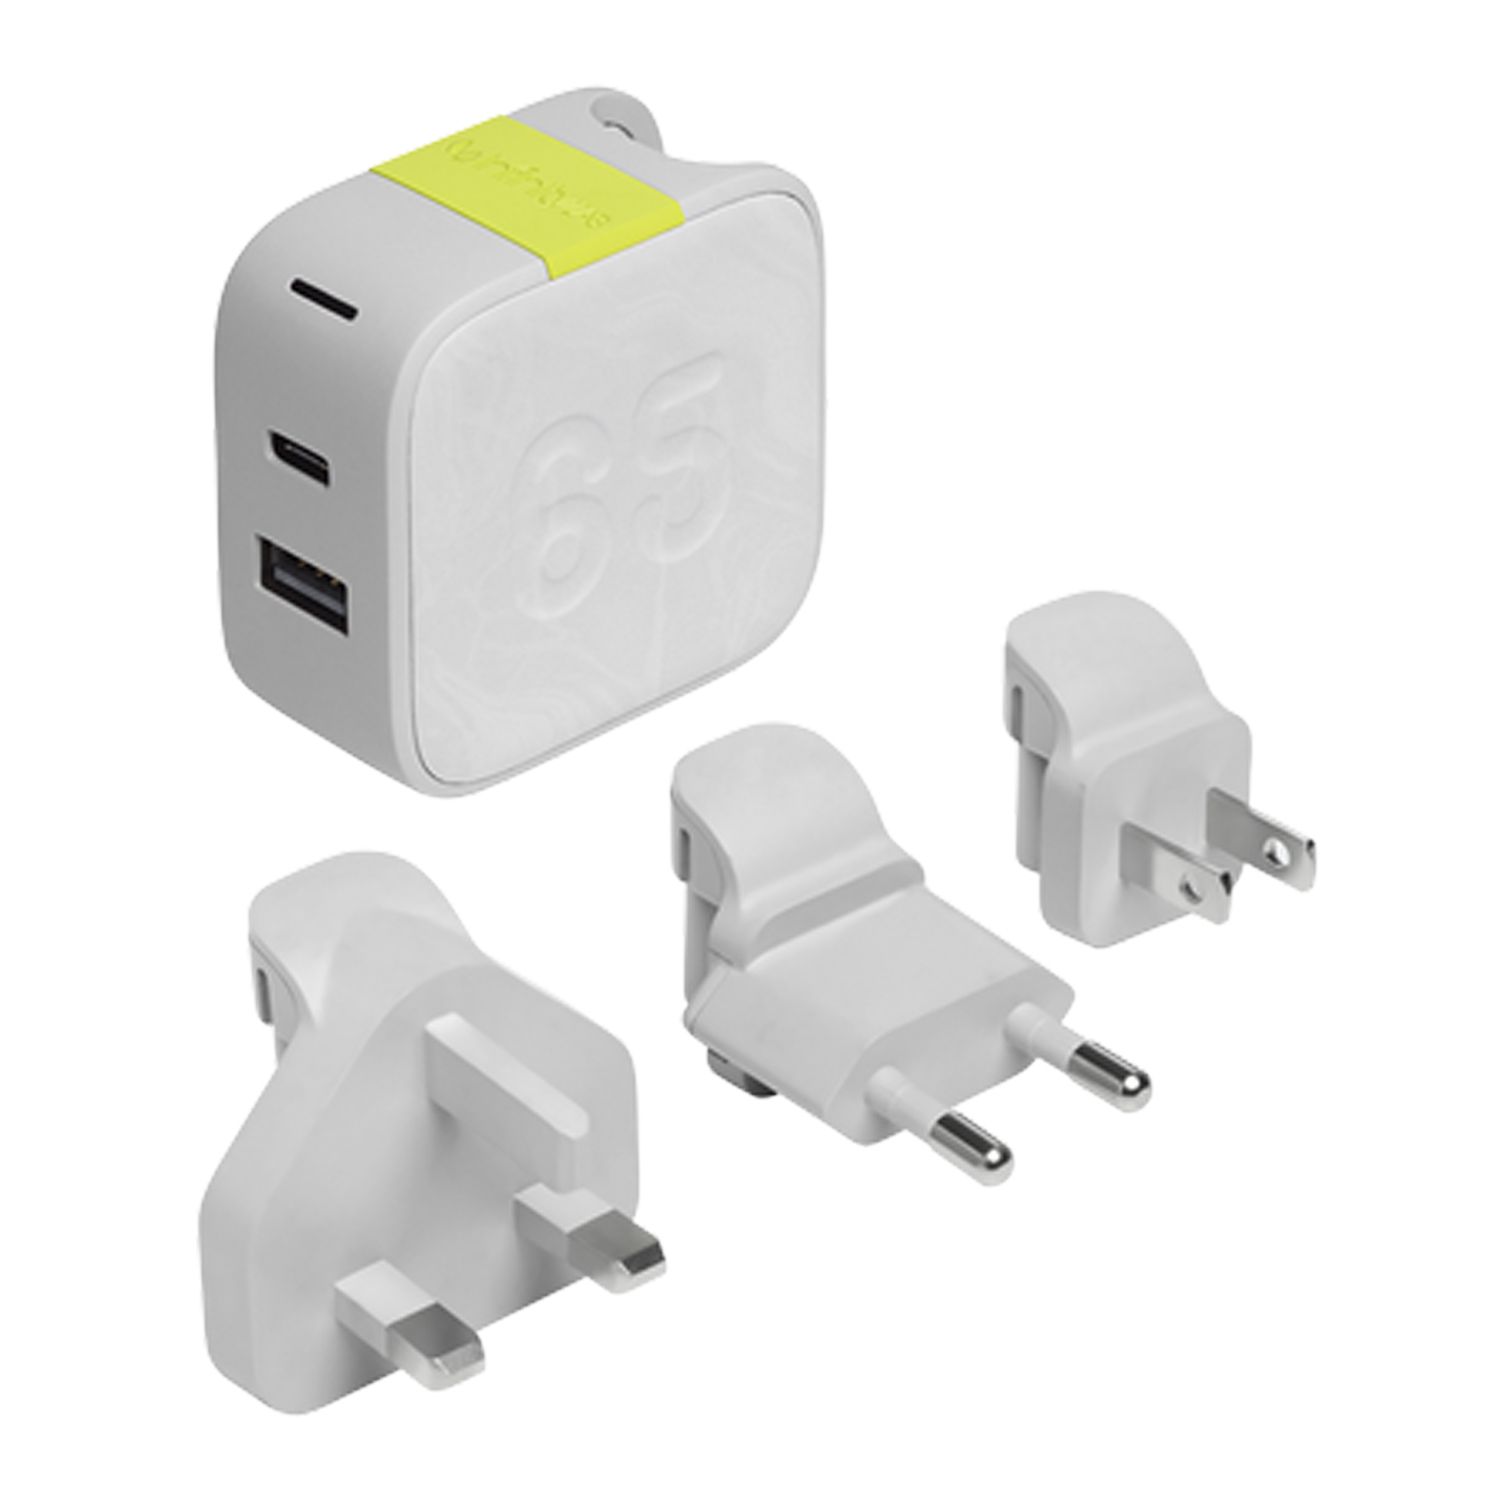 instant charger with multiple attachments